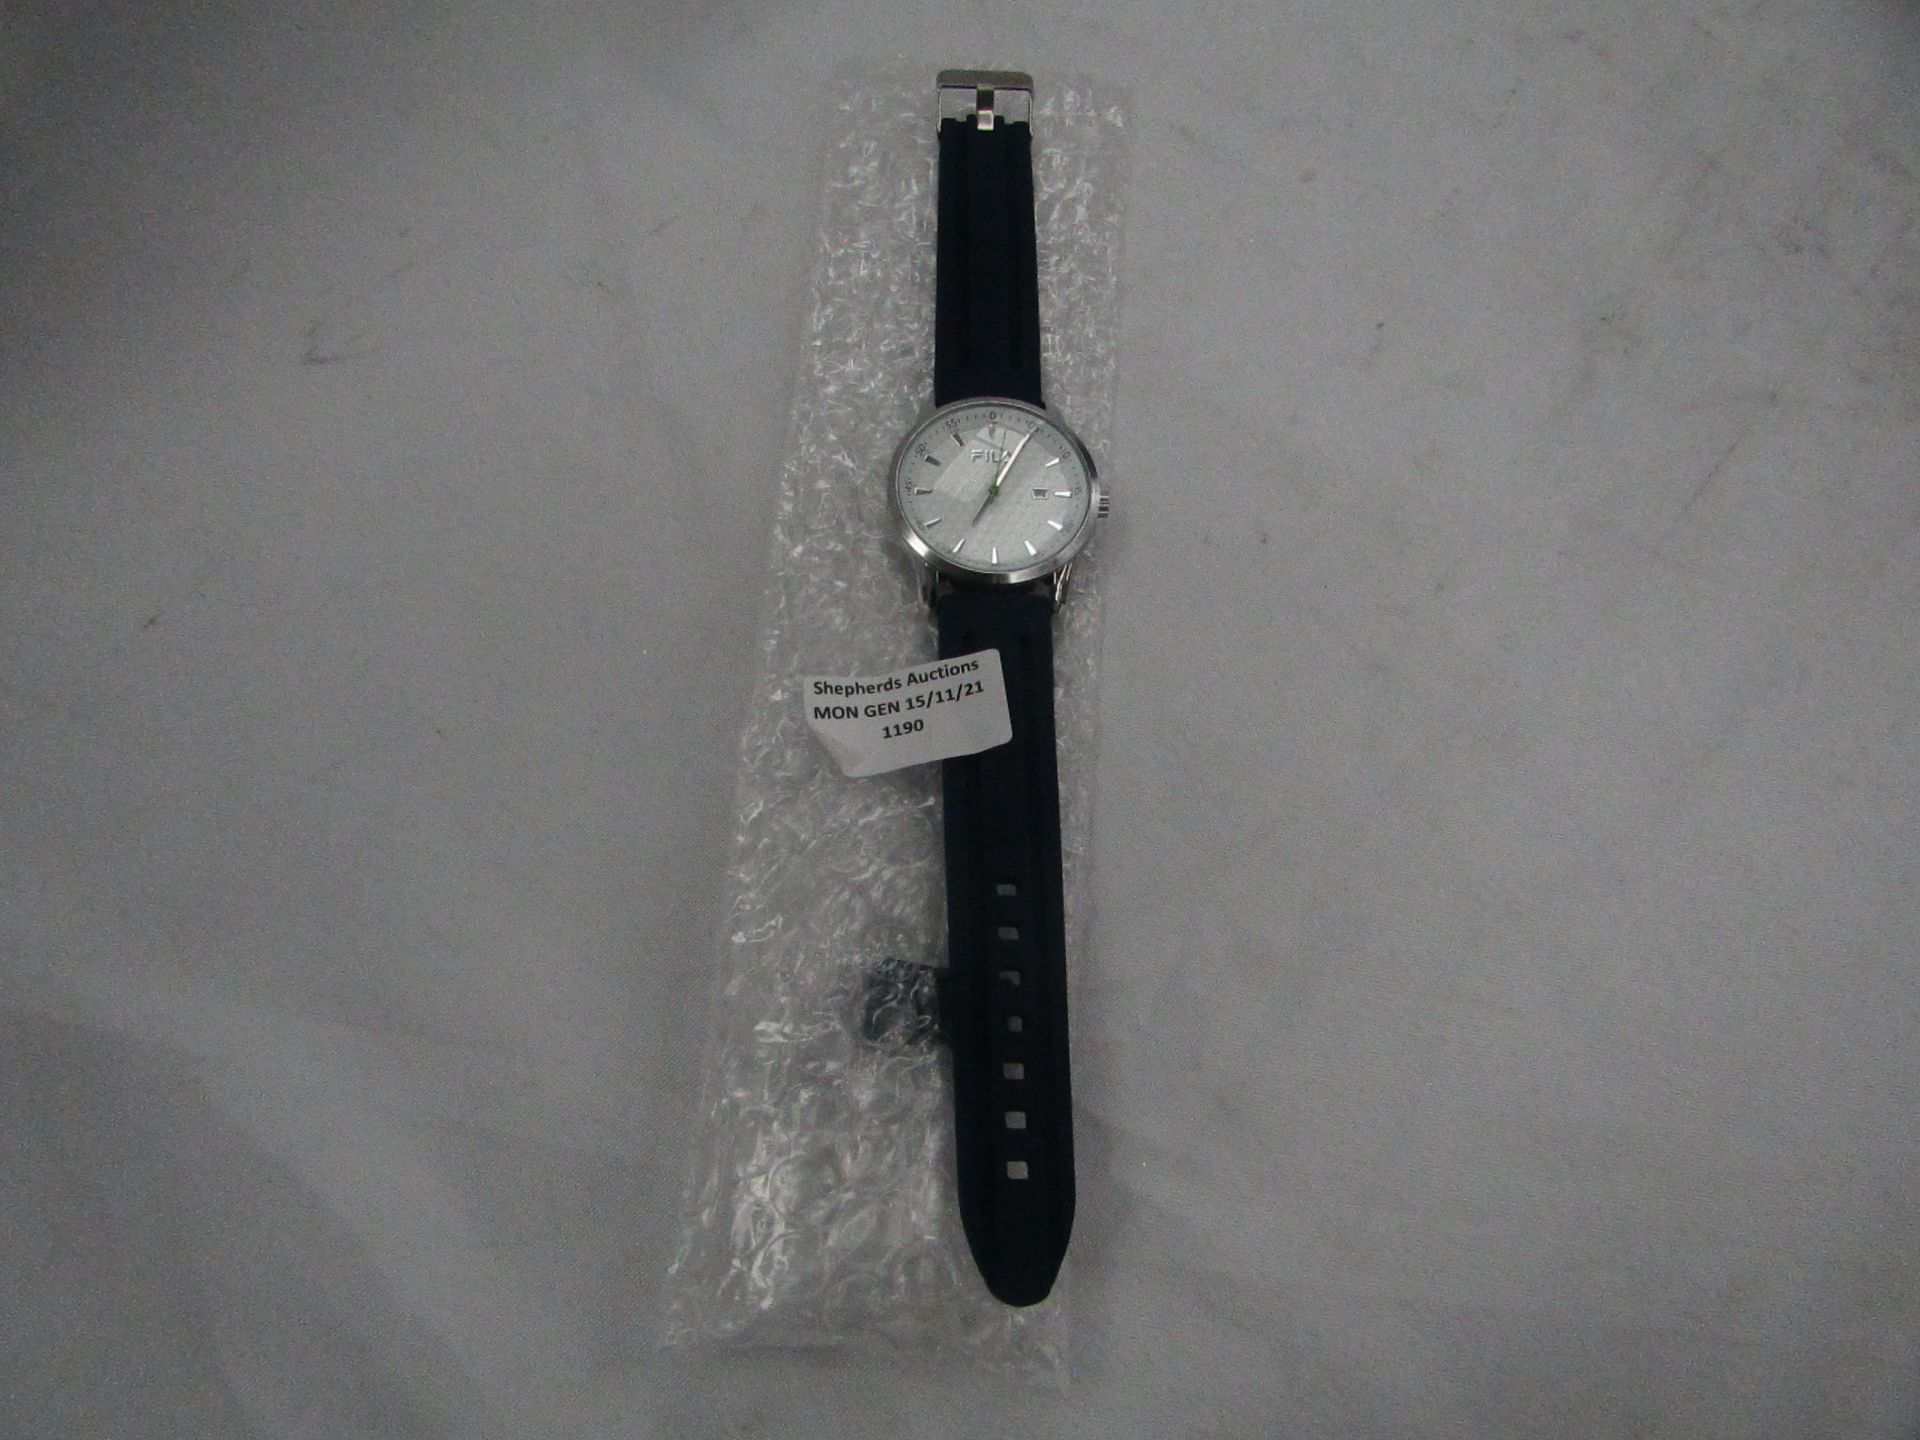 FILA Stainless Steel bezzle Navy Blue Silicone Straps - Tested Working & No Packaging.